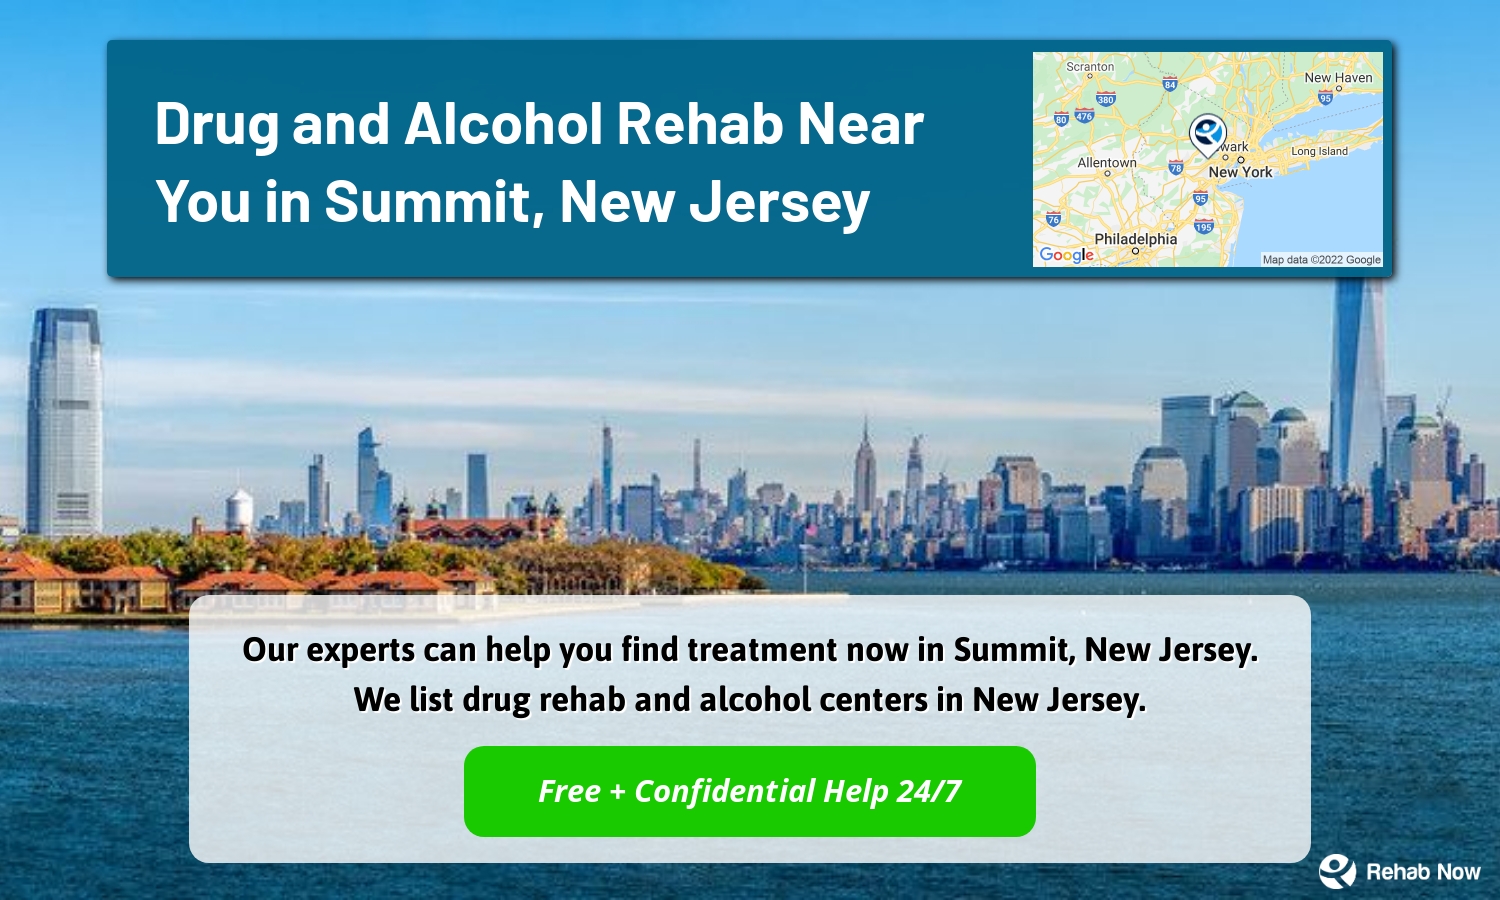 Our experts can help you find treatment now in Summit, New Jersey. We list drug rehab and alcohol centers in New Jersey.